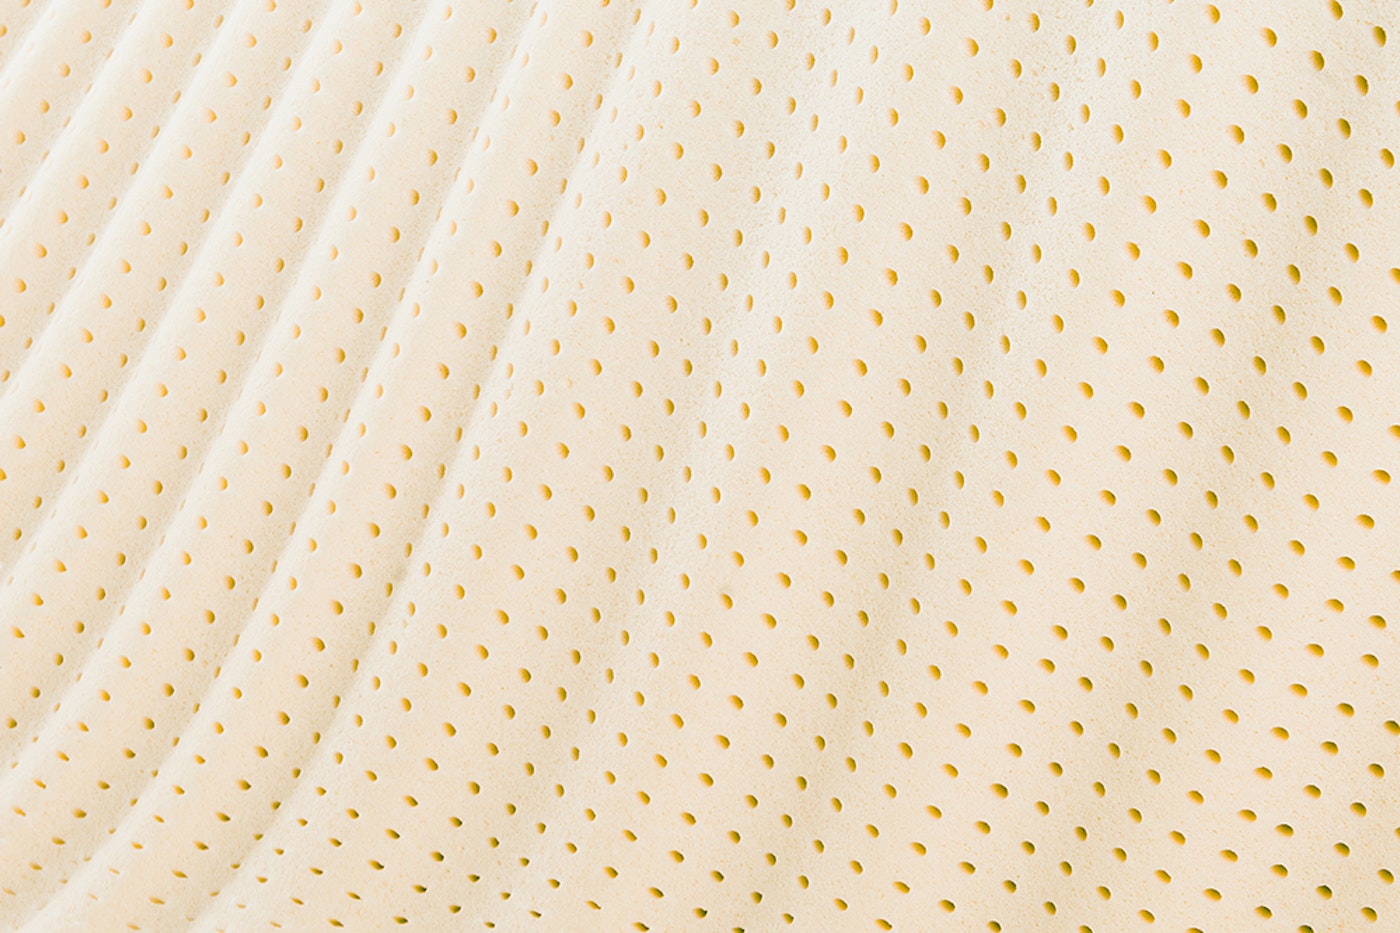 Vita Talalay Hypoallergenic Mattress and Pillow - What Does Hypoallergenic Really Mean?